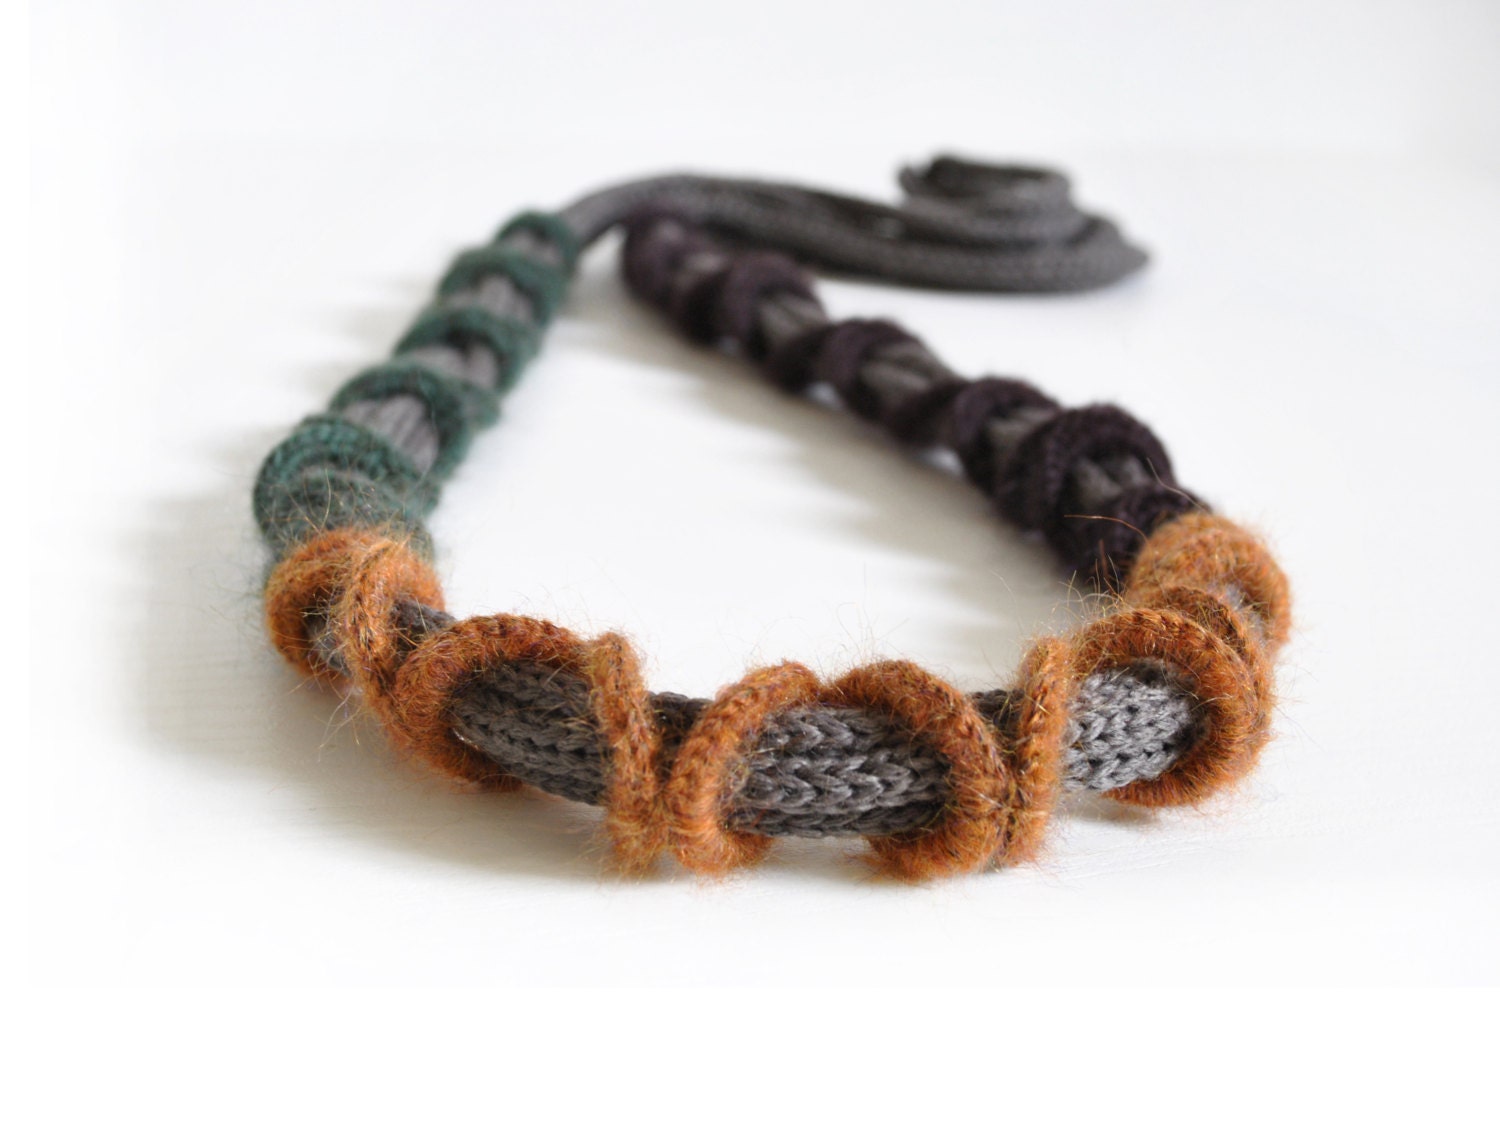 Knit cashmere fiber necklace / Textile necklace / Rustic chic jewelry / Modern fiber necklace / Fall fashion / Green brown mustard taupe - AliquidTextileJewels